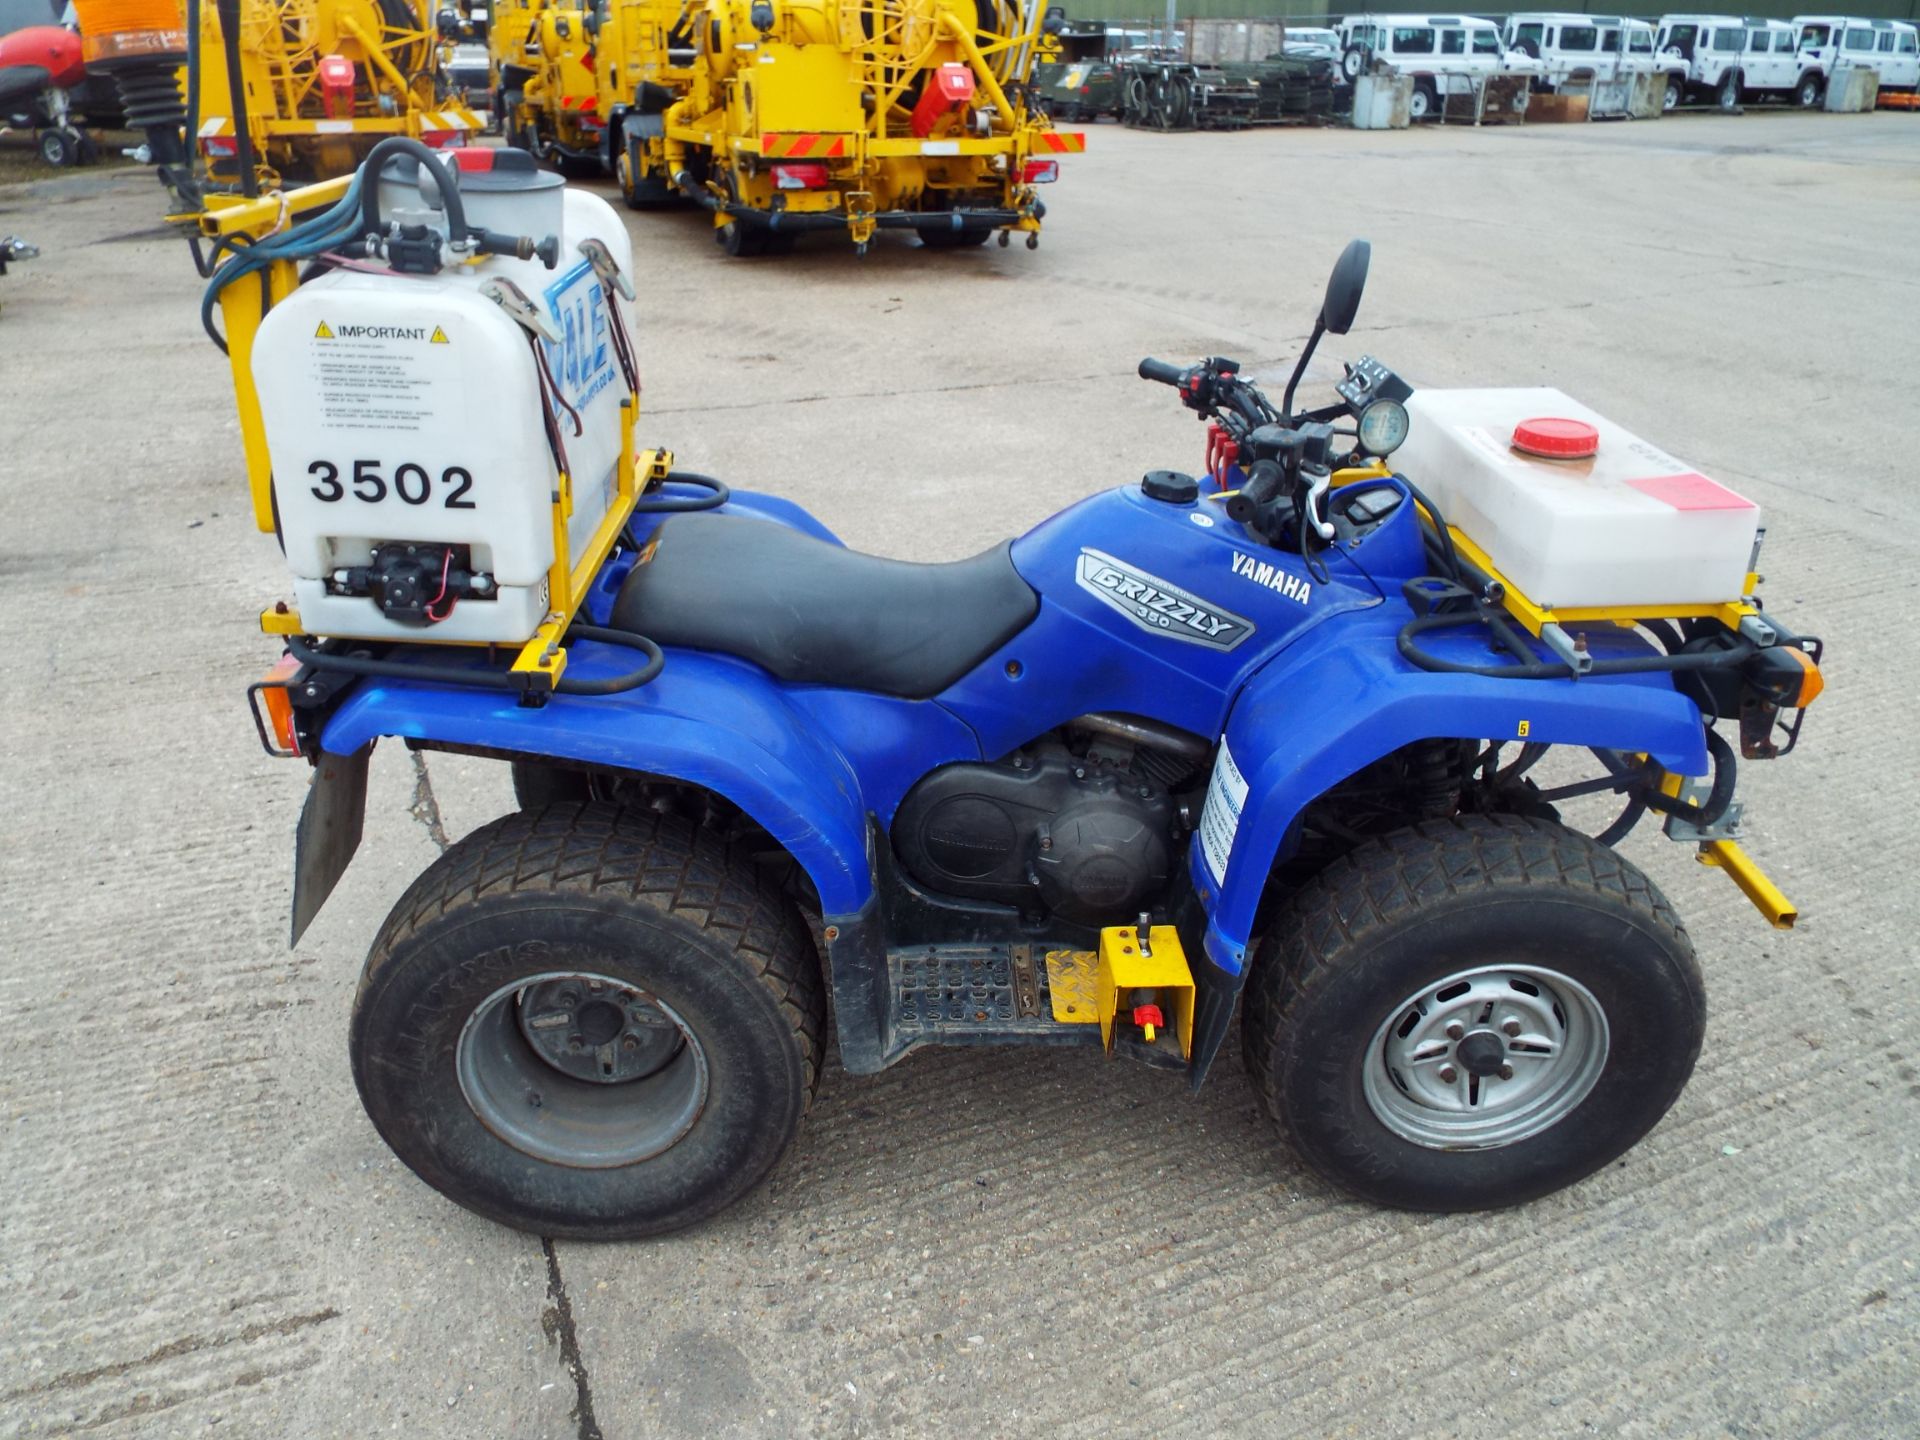 2008 Yamaha Grizzly 350 Ultramatic Quad Bike fitted with Vale Front/Rear Spraying Equipment - Image 8 of 26